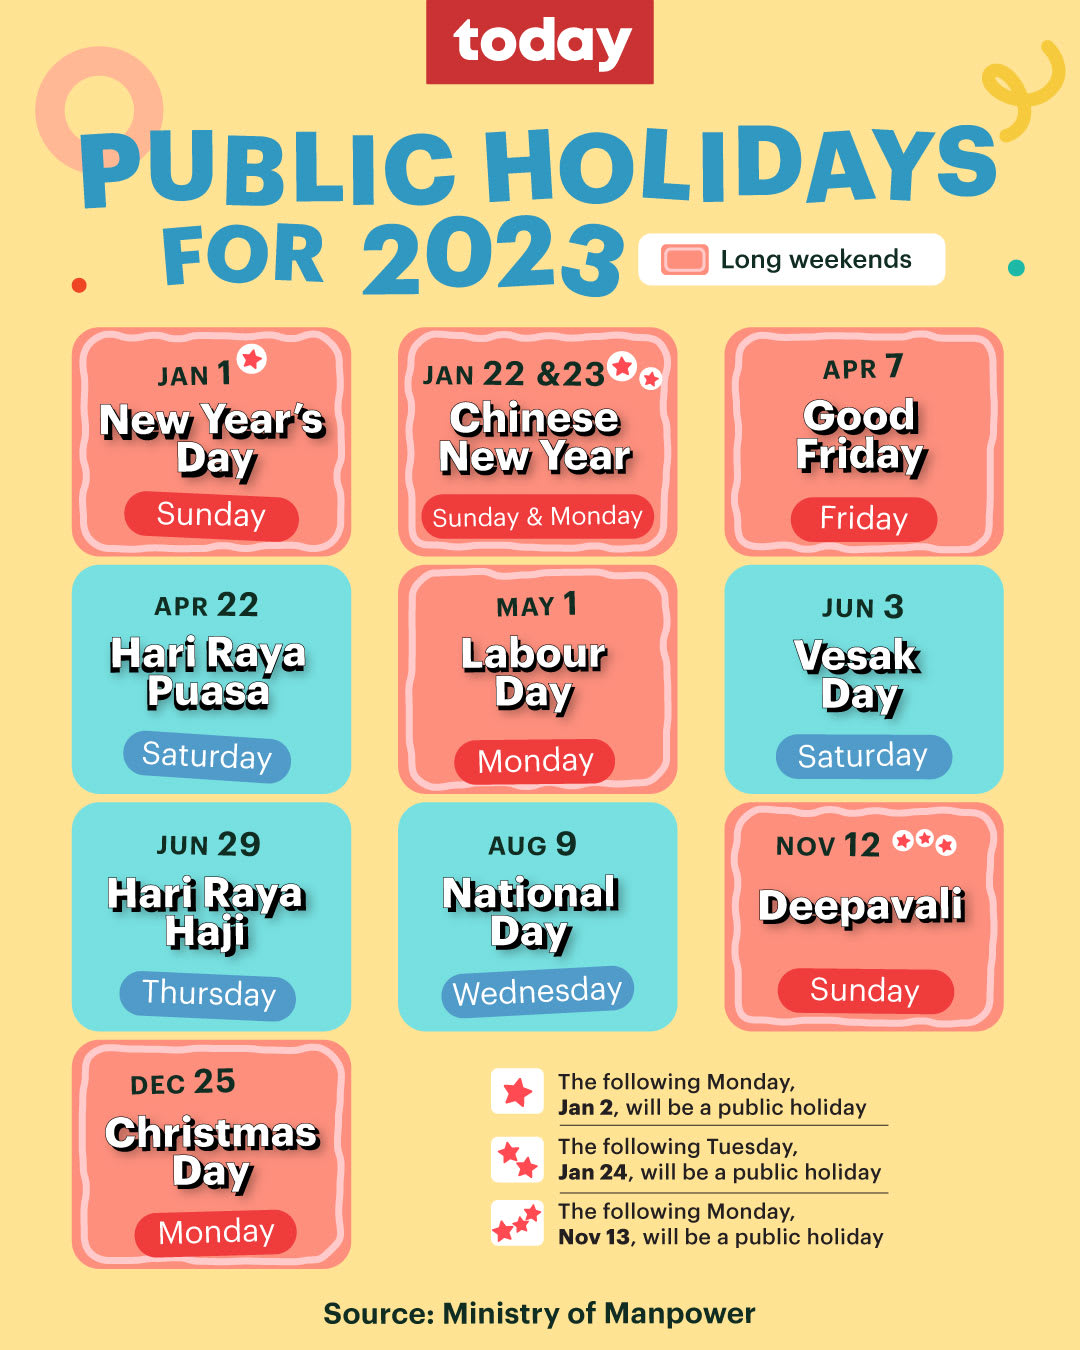 singapore-to-have-6-long-public-holiday-weekends-in-2023-today